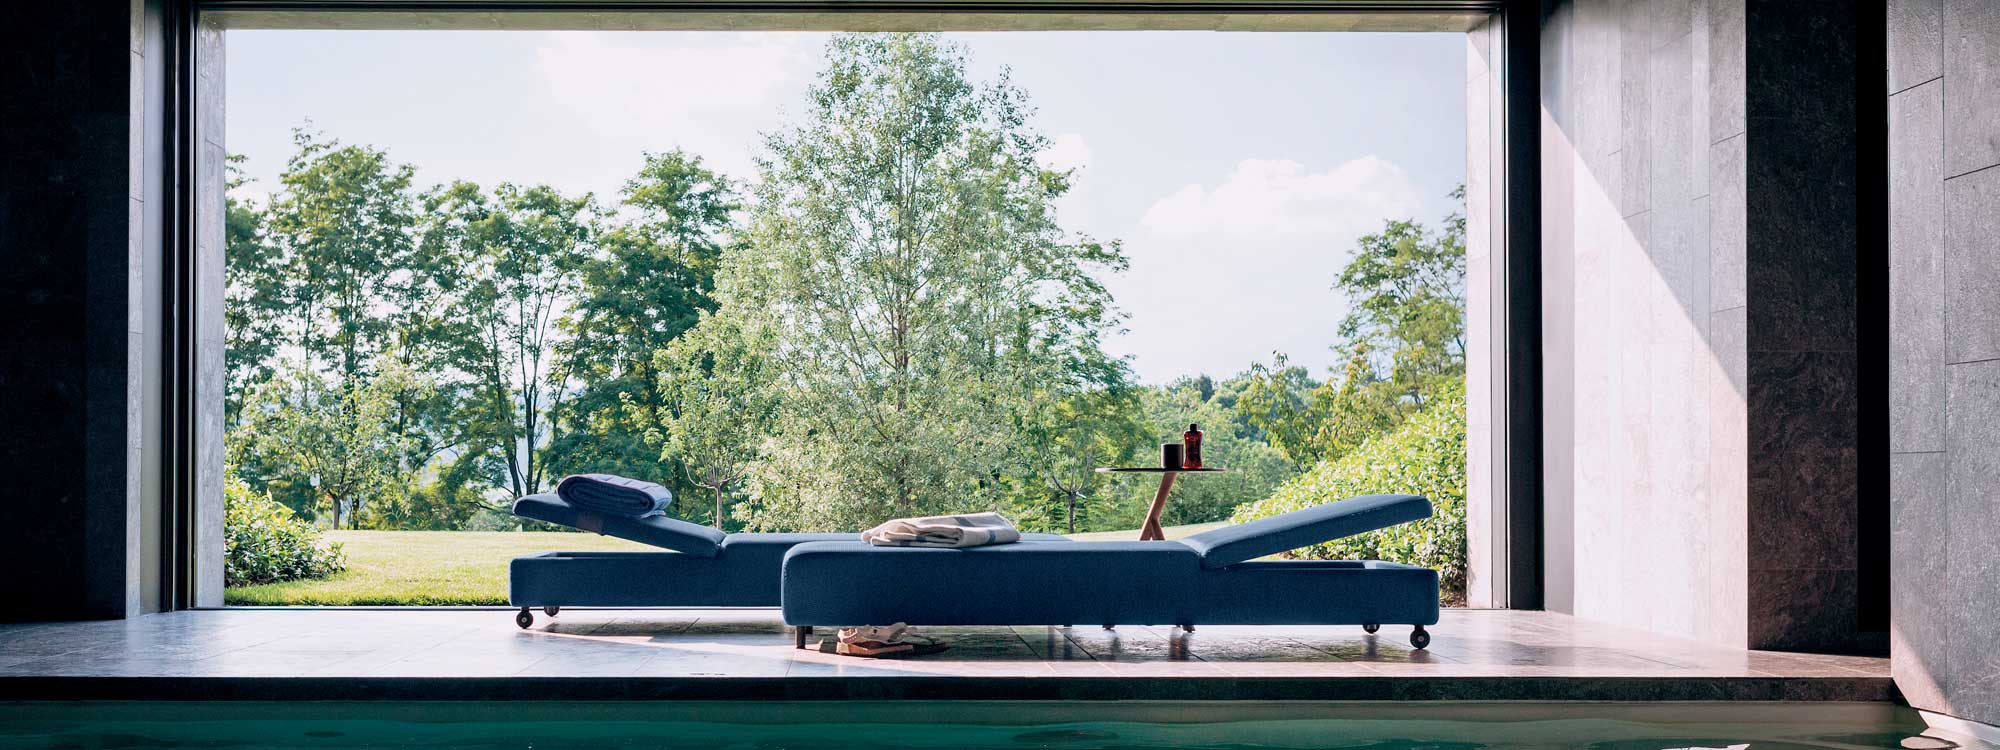 Image of pair of Double upholstered sun loungers by Rodolfo Dordini for RODA, shown on minimalist indoor poolside with garden and trees in the background